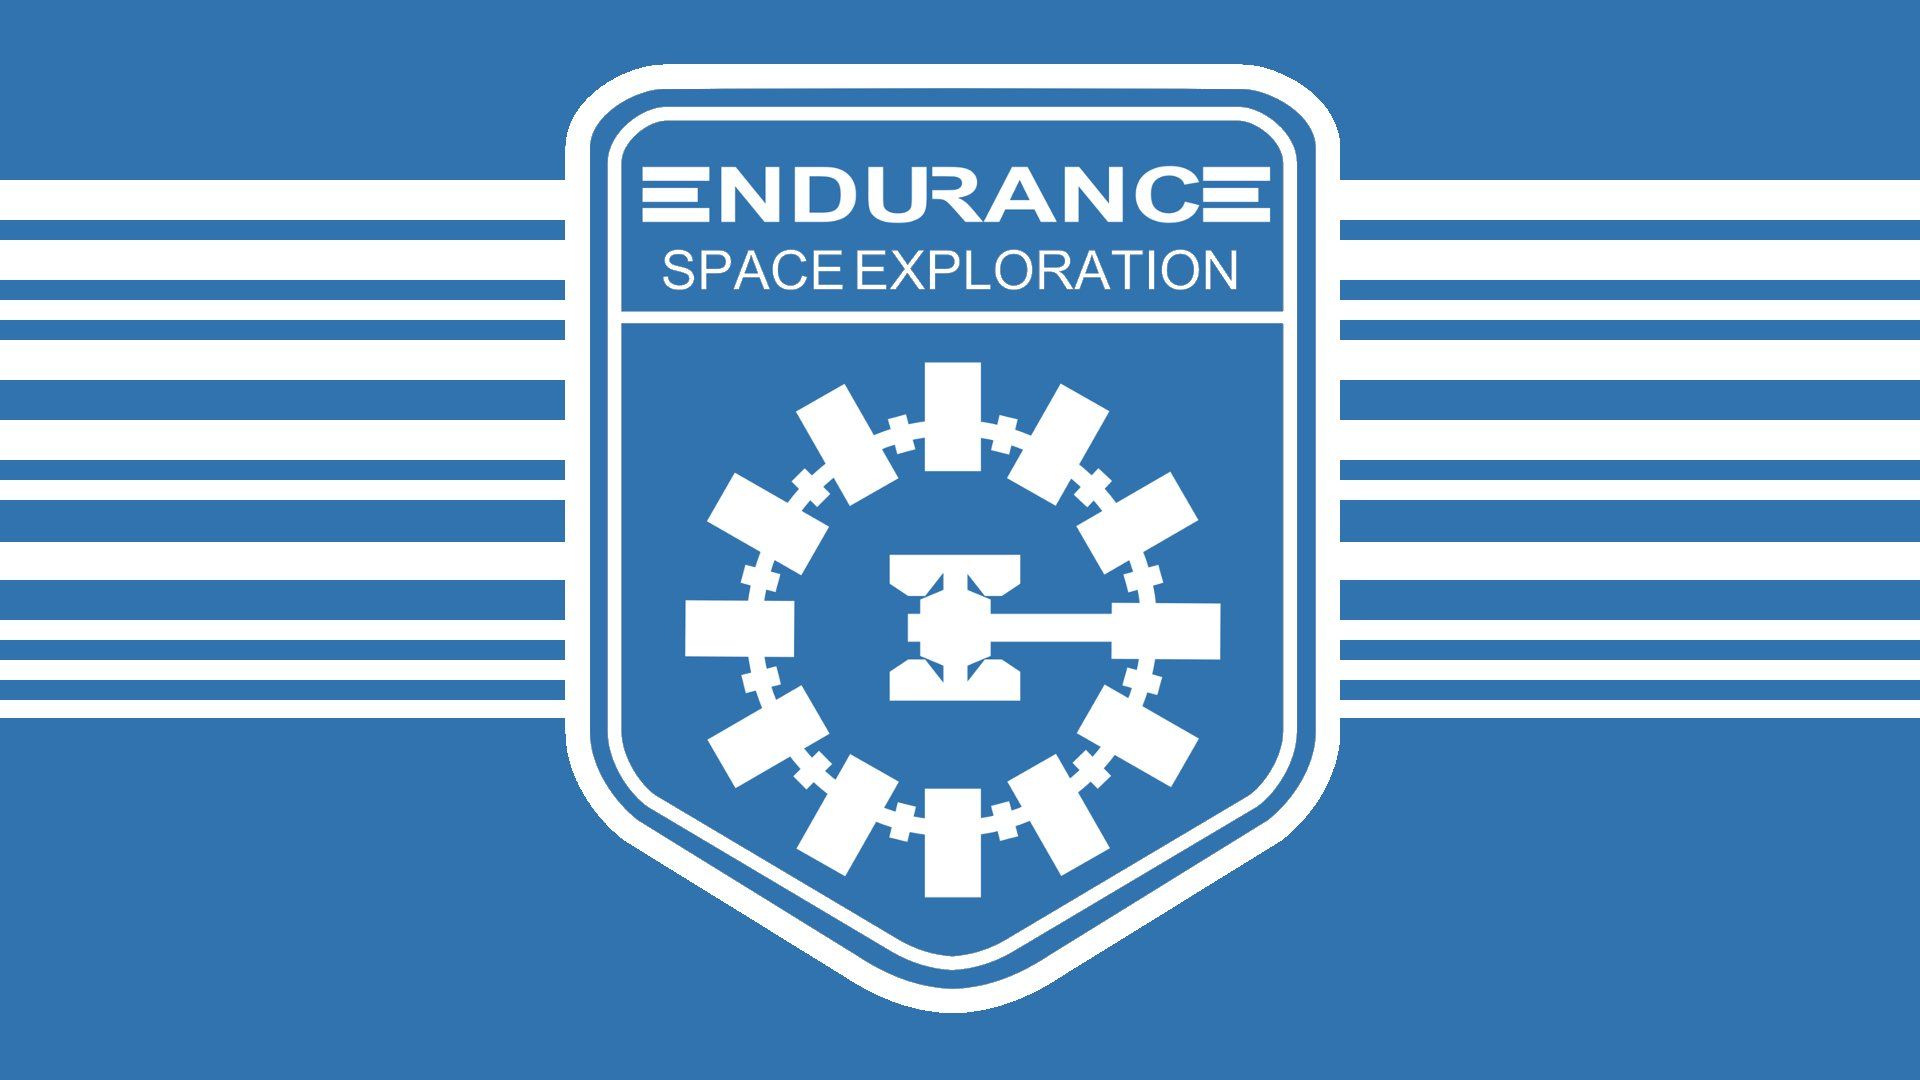 Endurance 4K wallpaper for your desktop or mobile screen free and easy to download